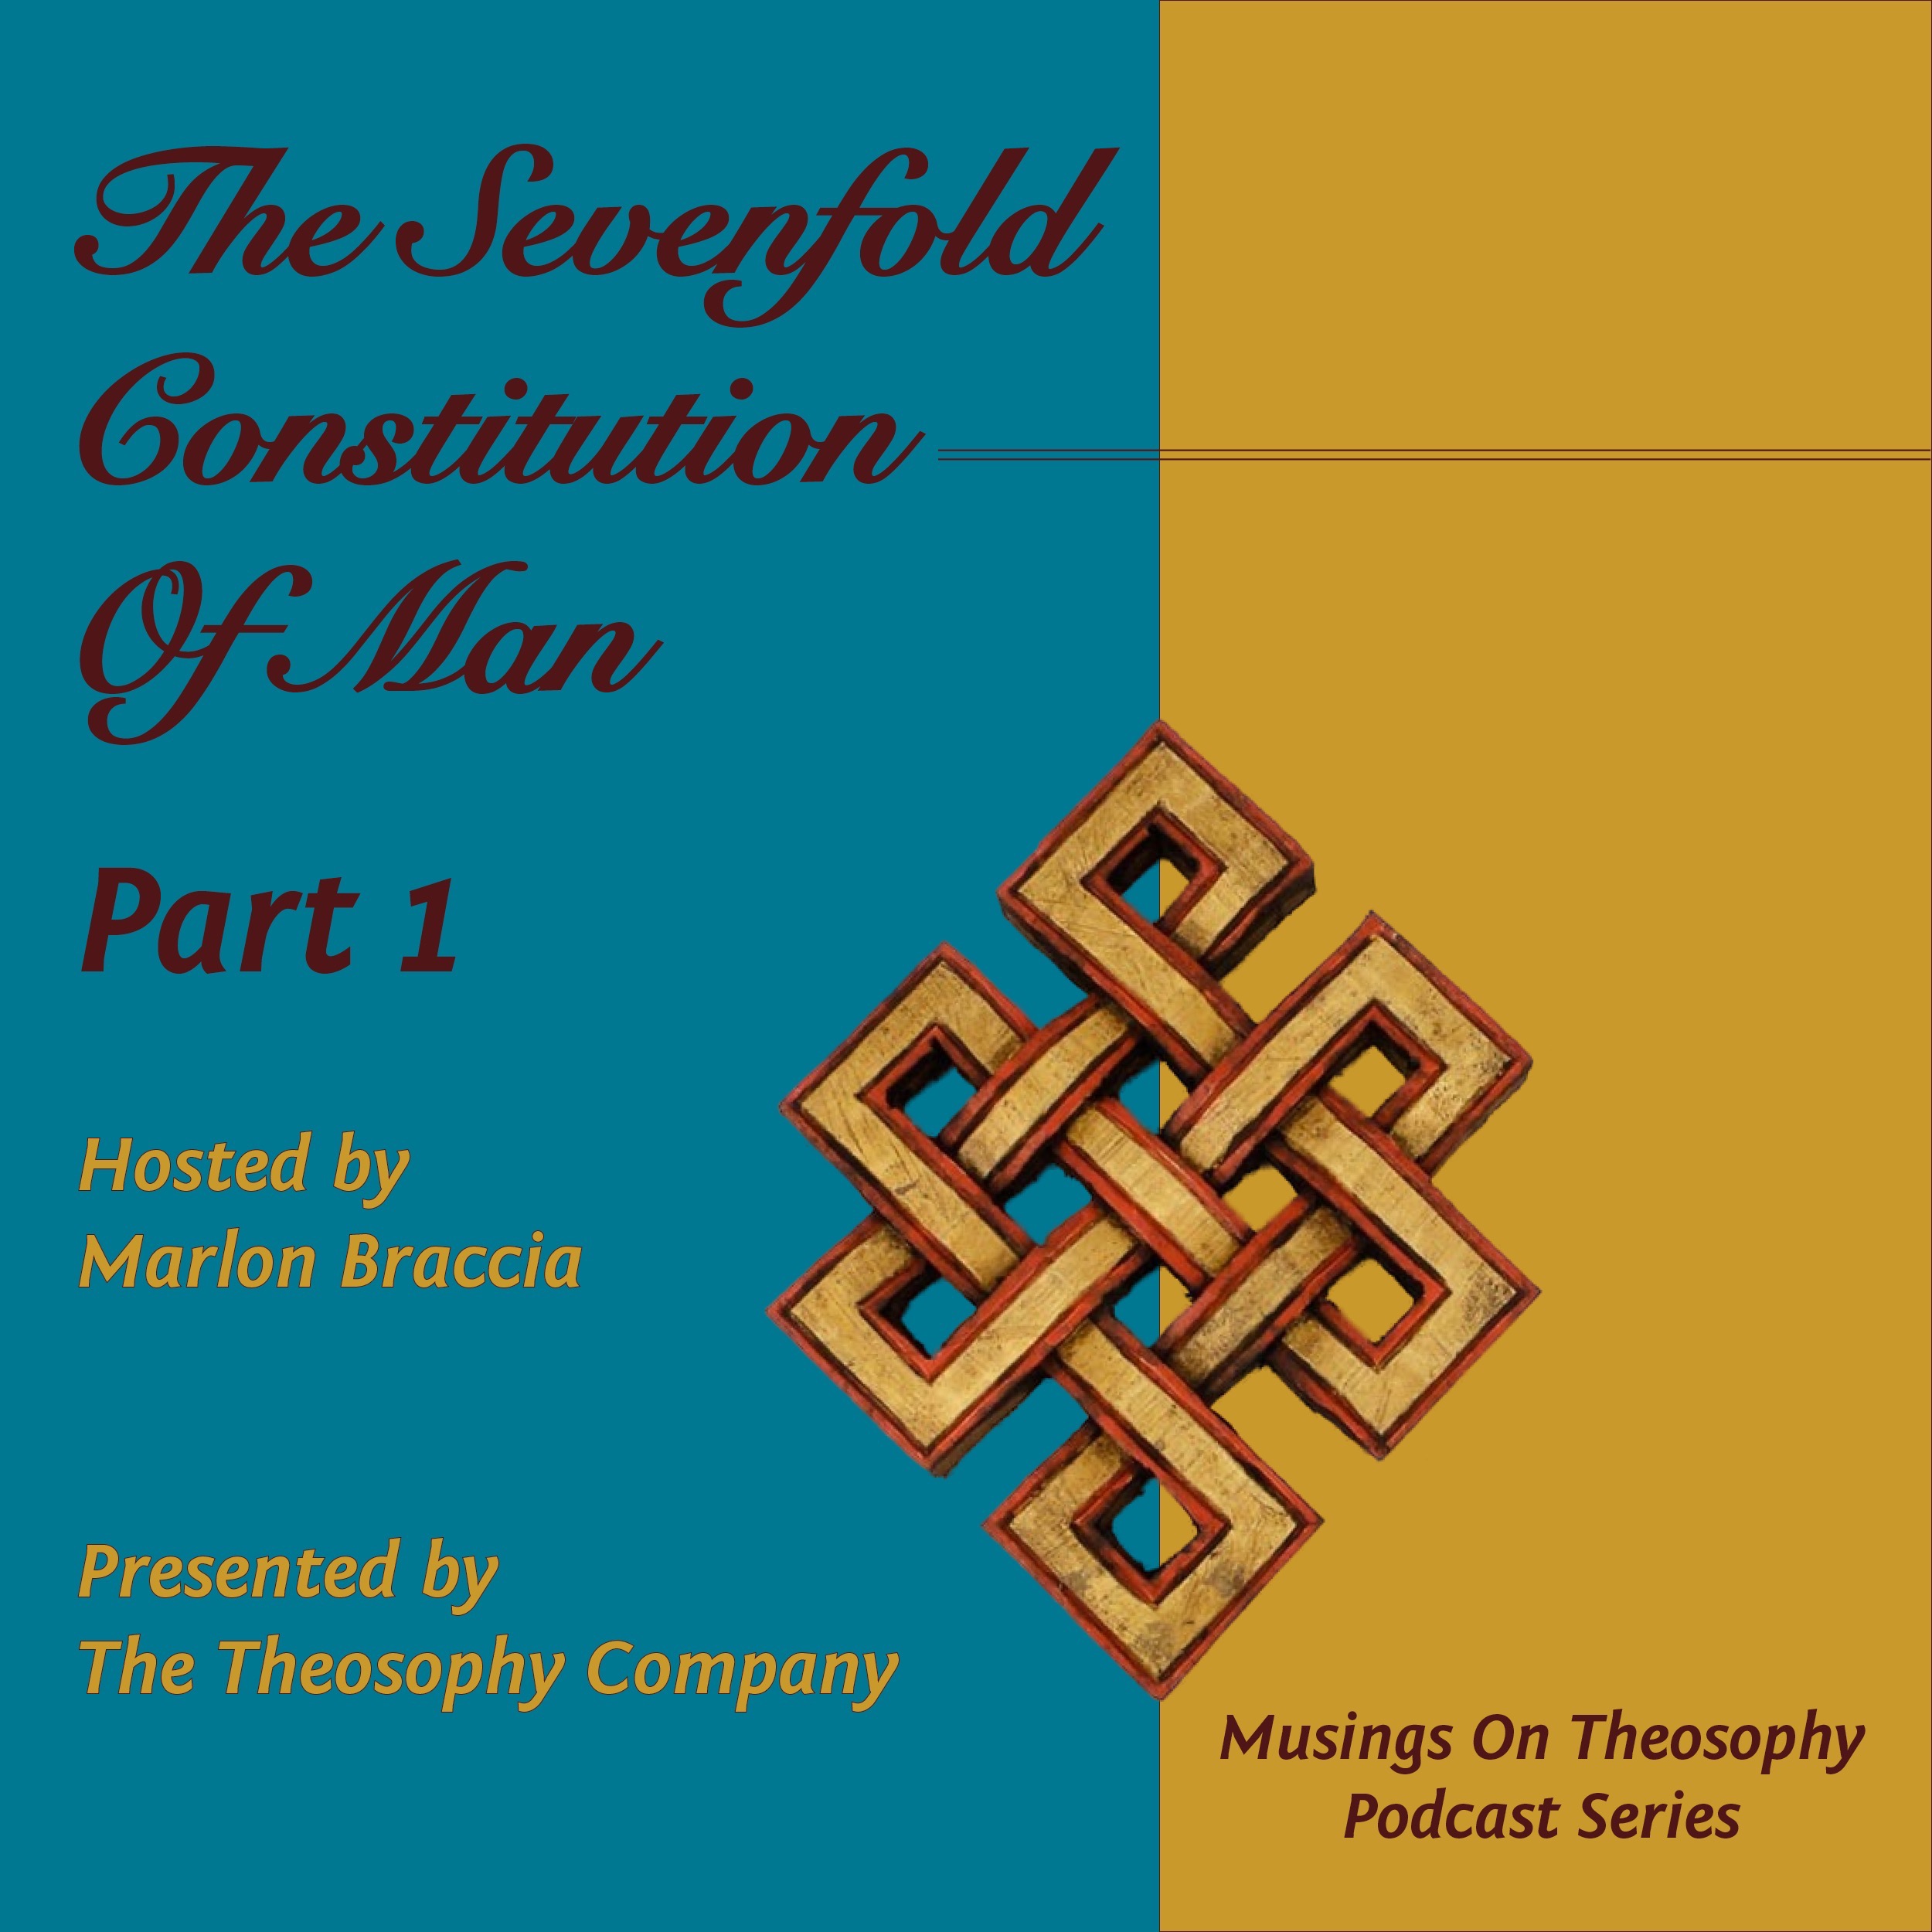 The Sevenfold Constitution Of Man -Part 1